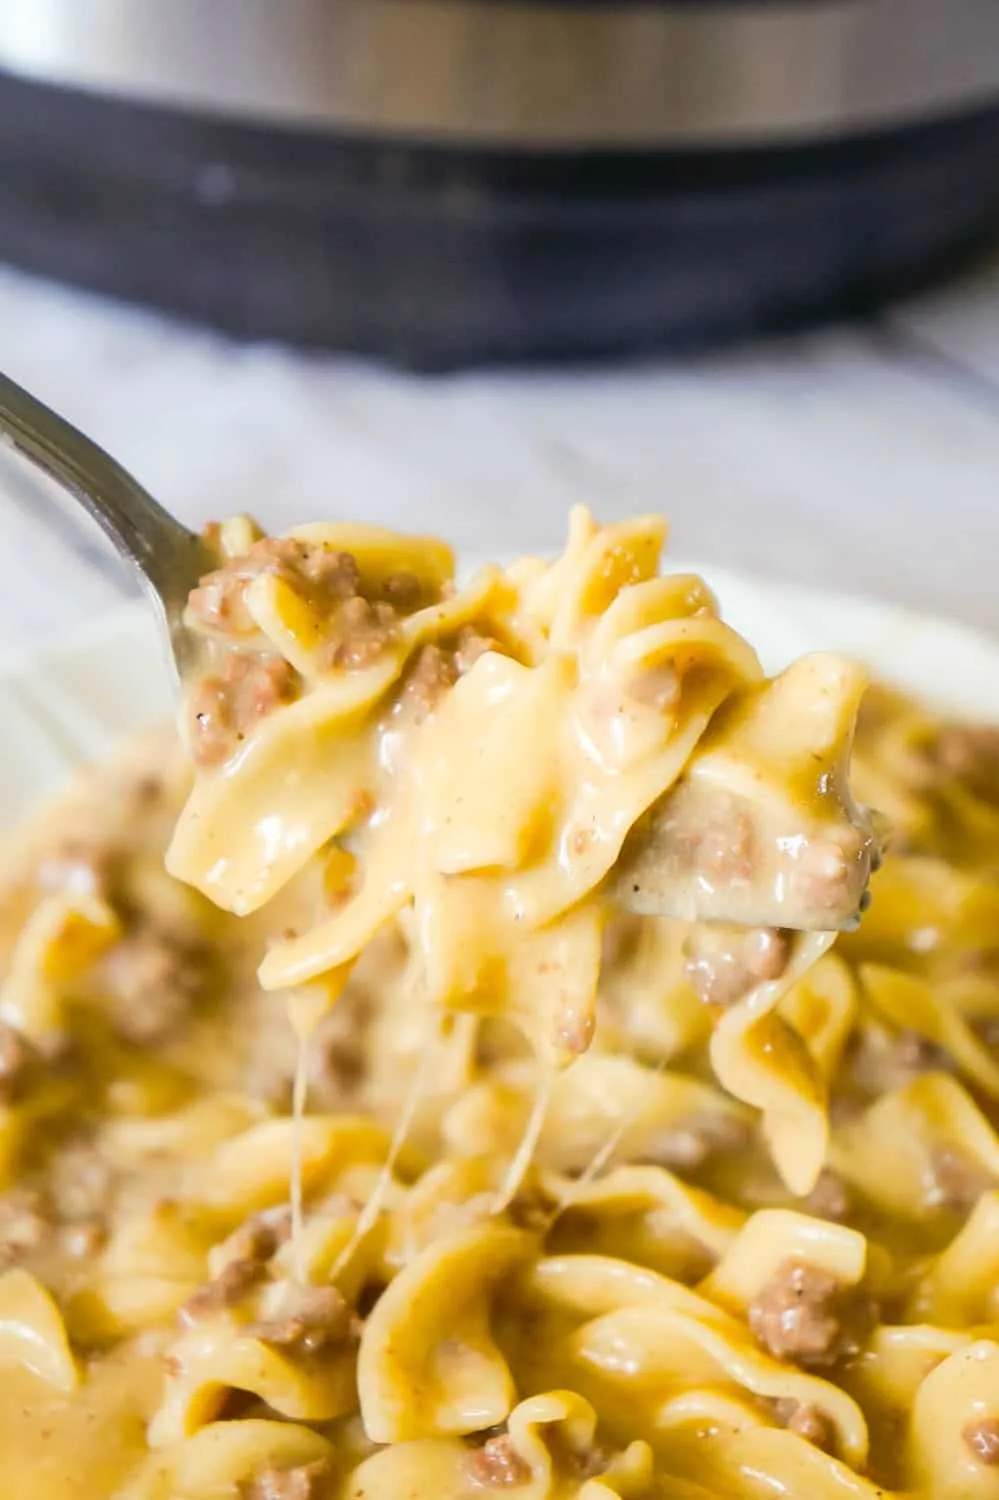 Instant Pot Cheesy Ground Beef and Noodles is an easy pressure cooker dinner recipe using hamburger meat and egg noodles loaded with mozzarella and cheddar cheese.